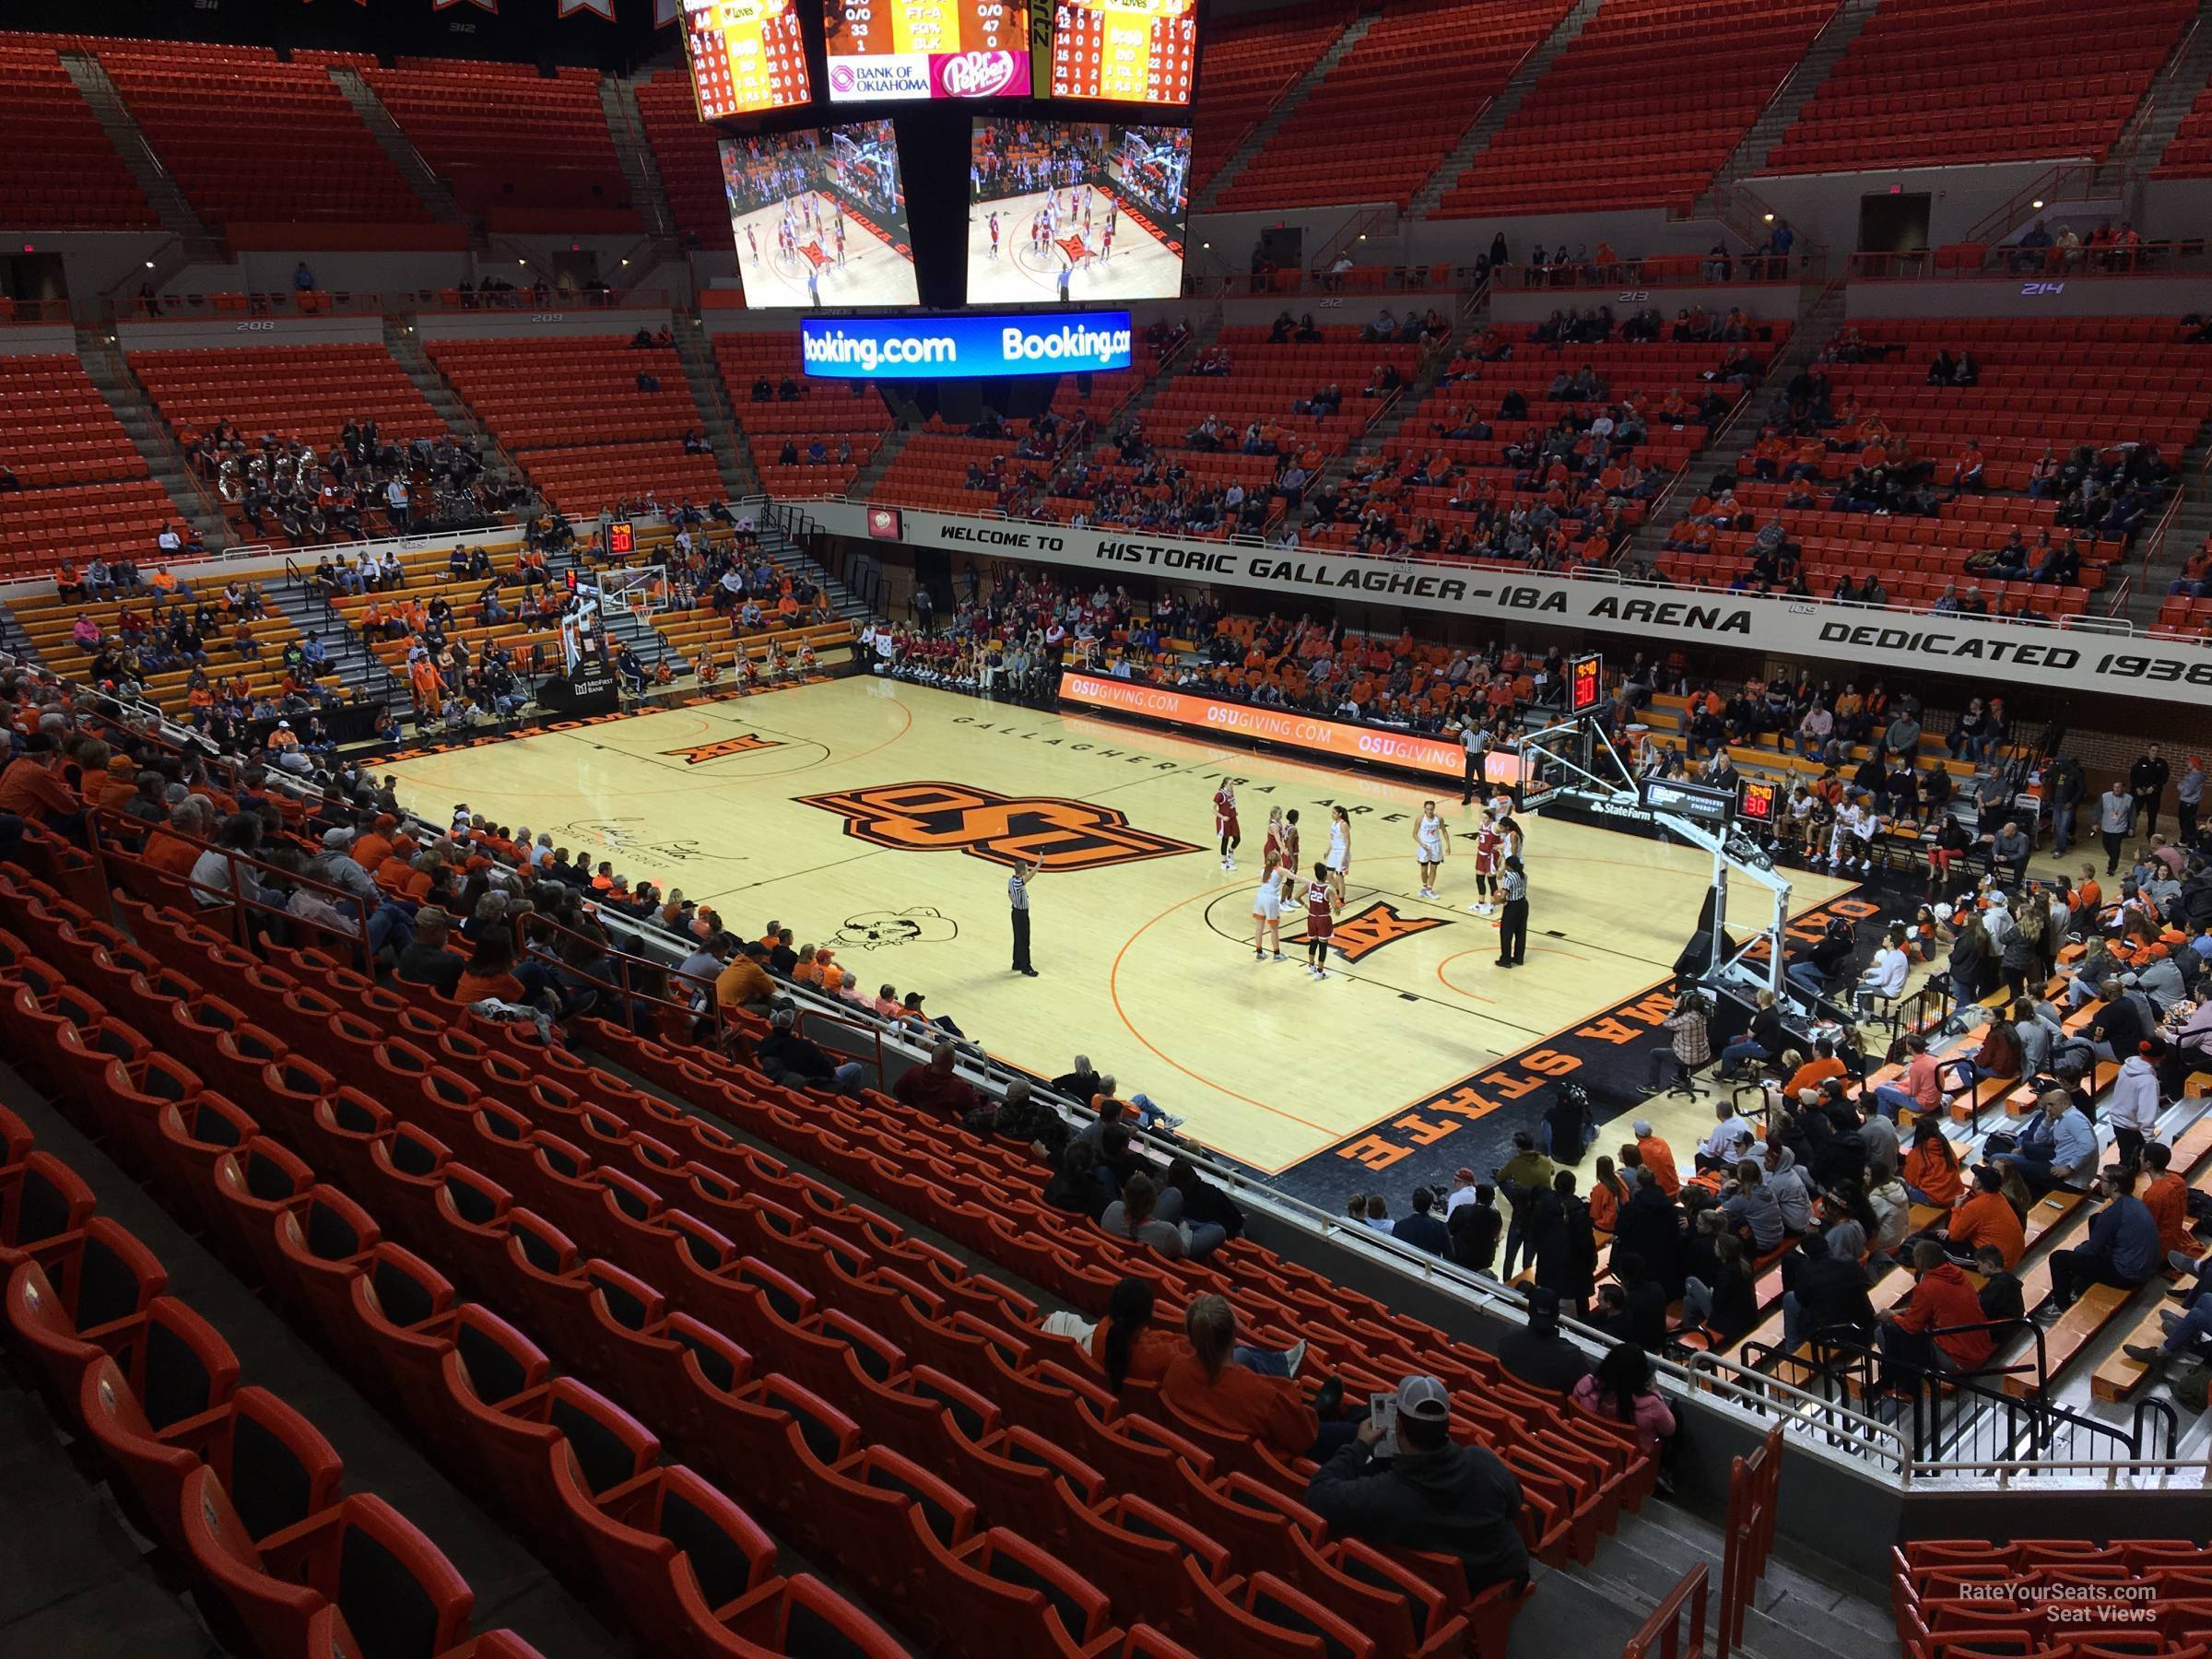 section 220, row 13 seat view  - gallagher-iba arena